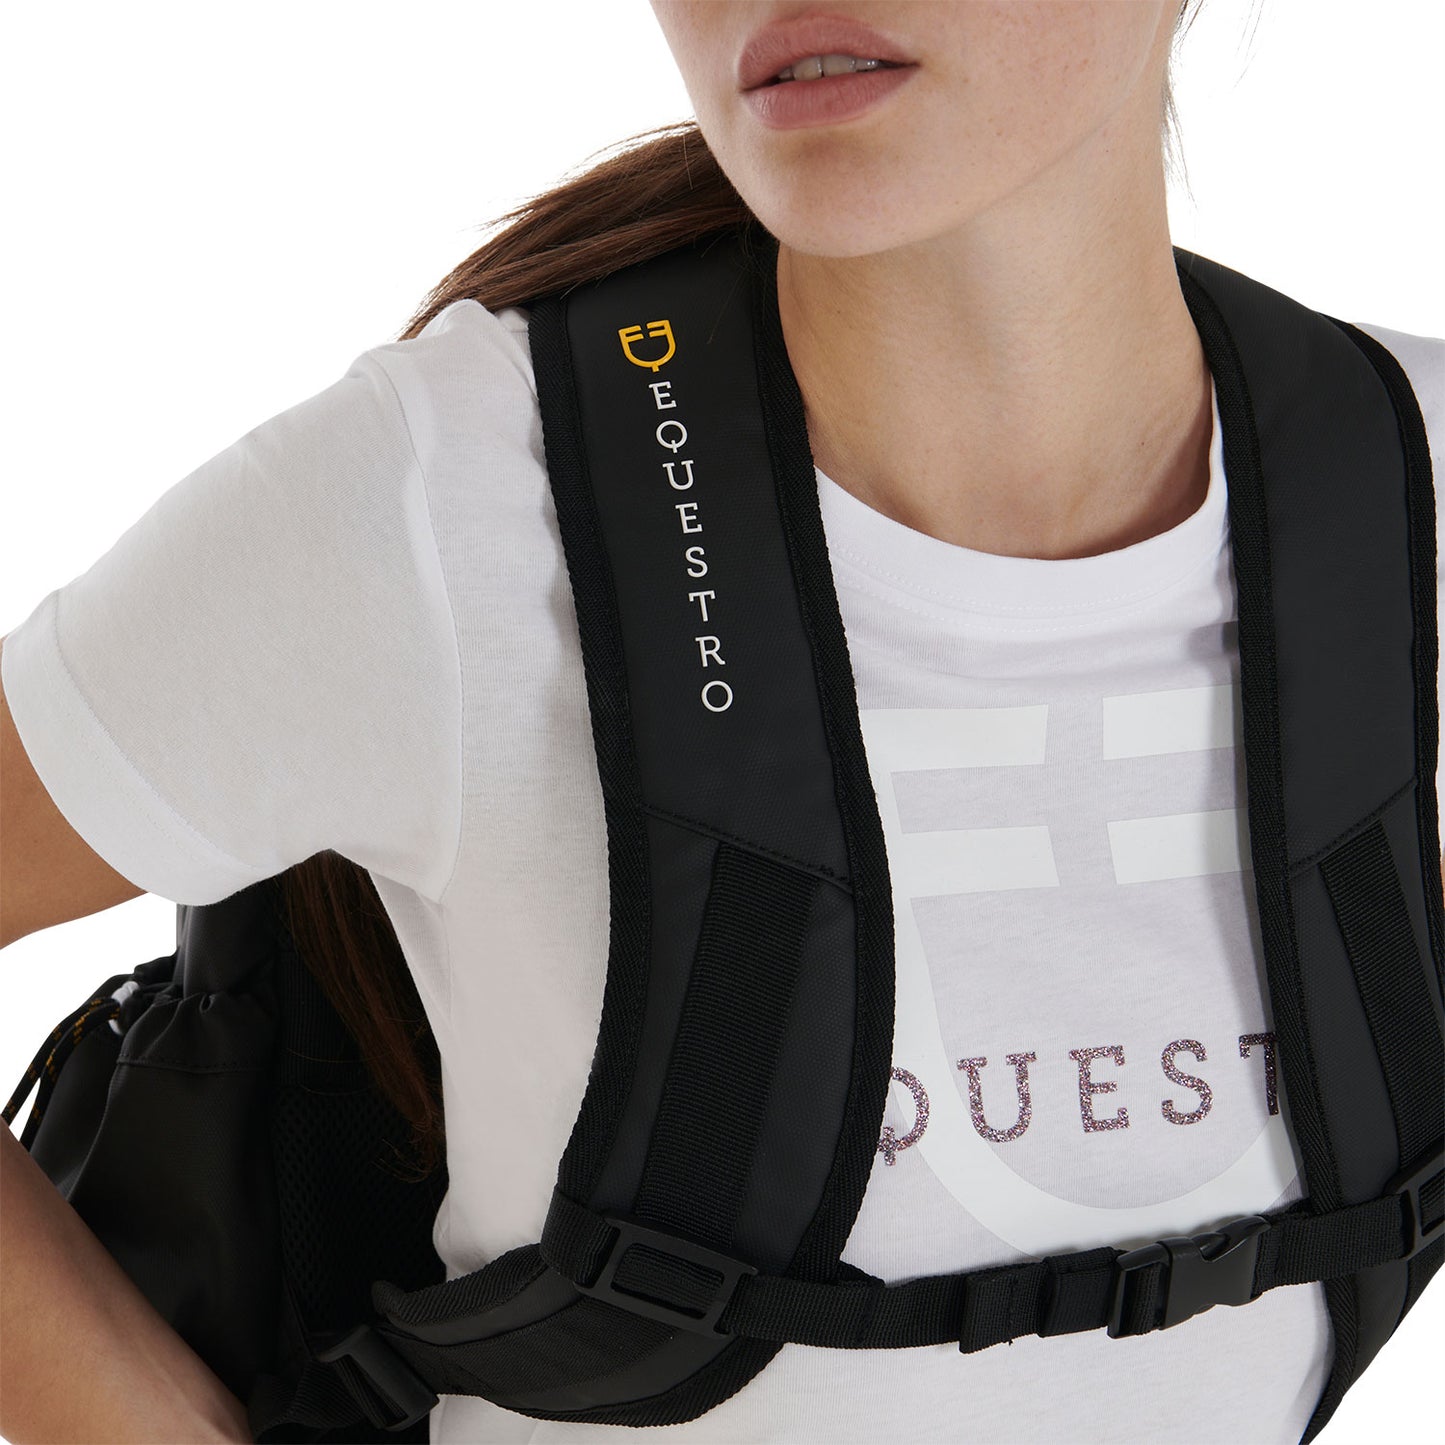 EQUESTRO - Multi-Pocket Technical Backpack